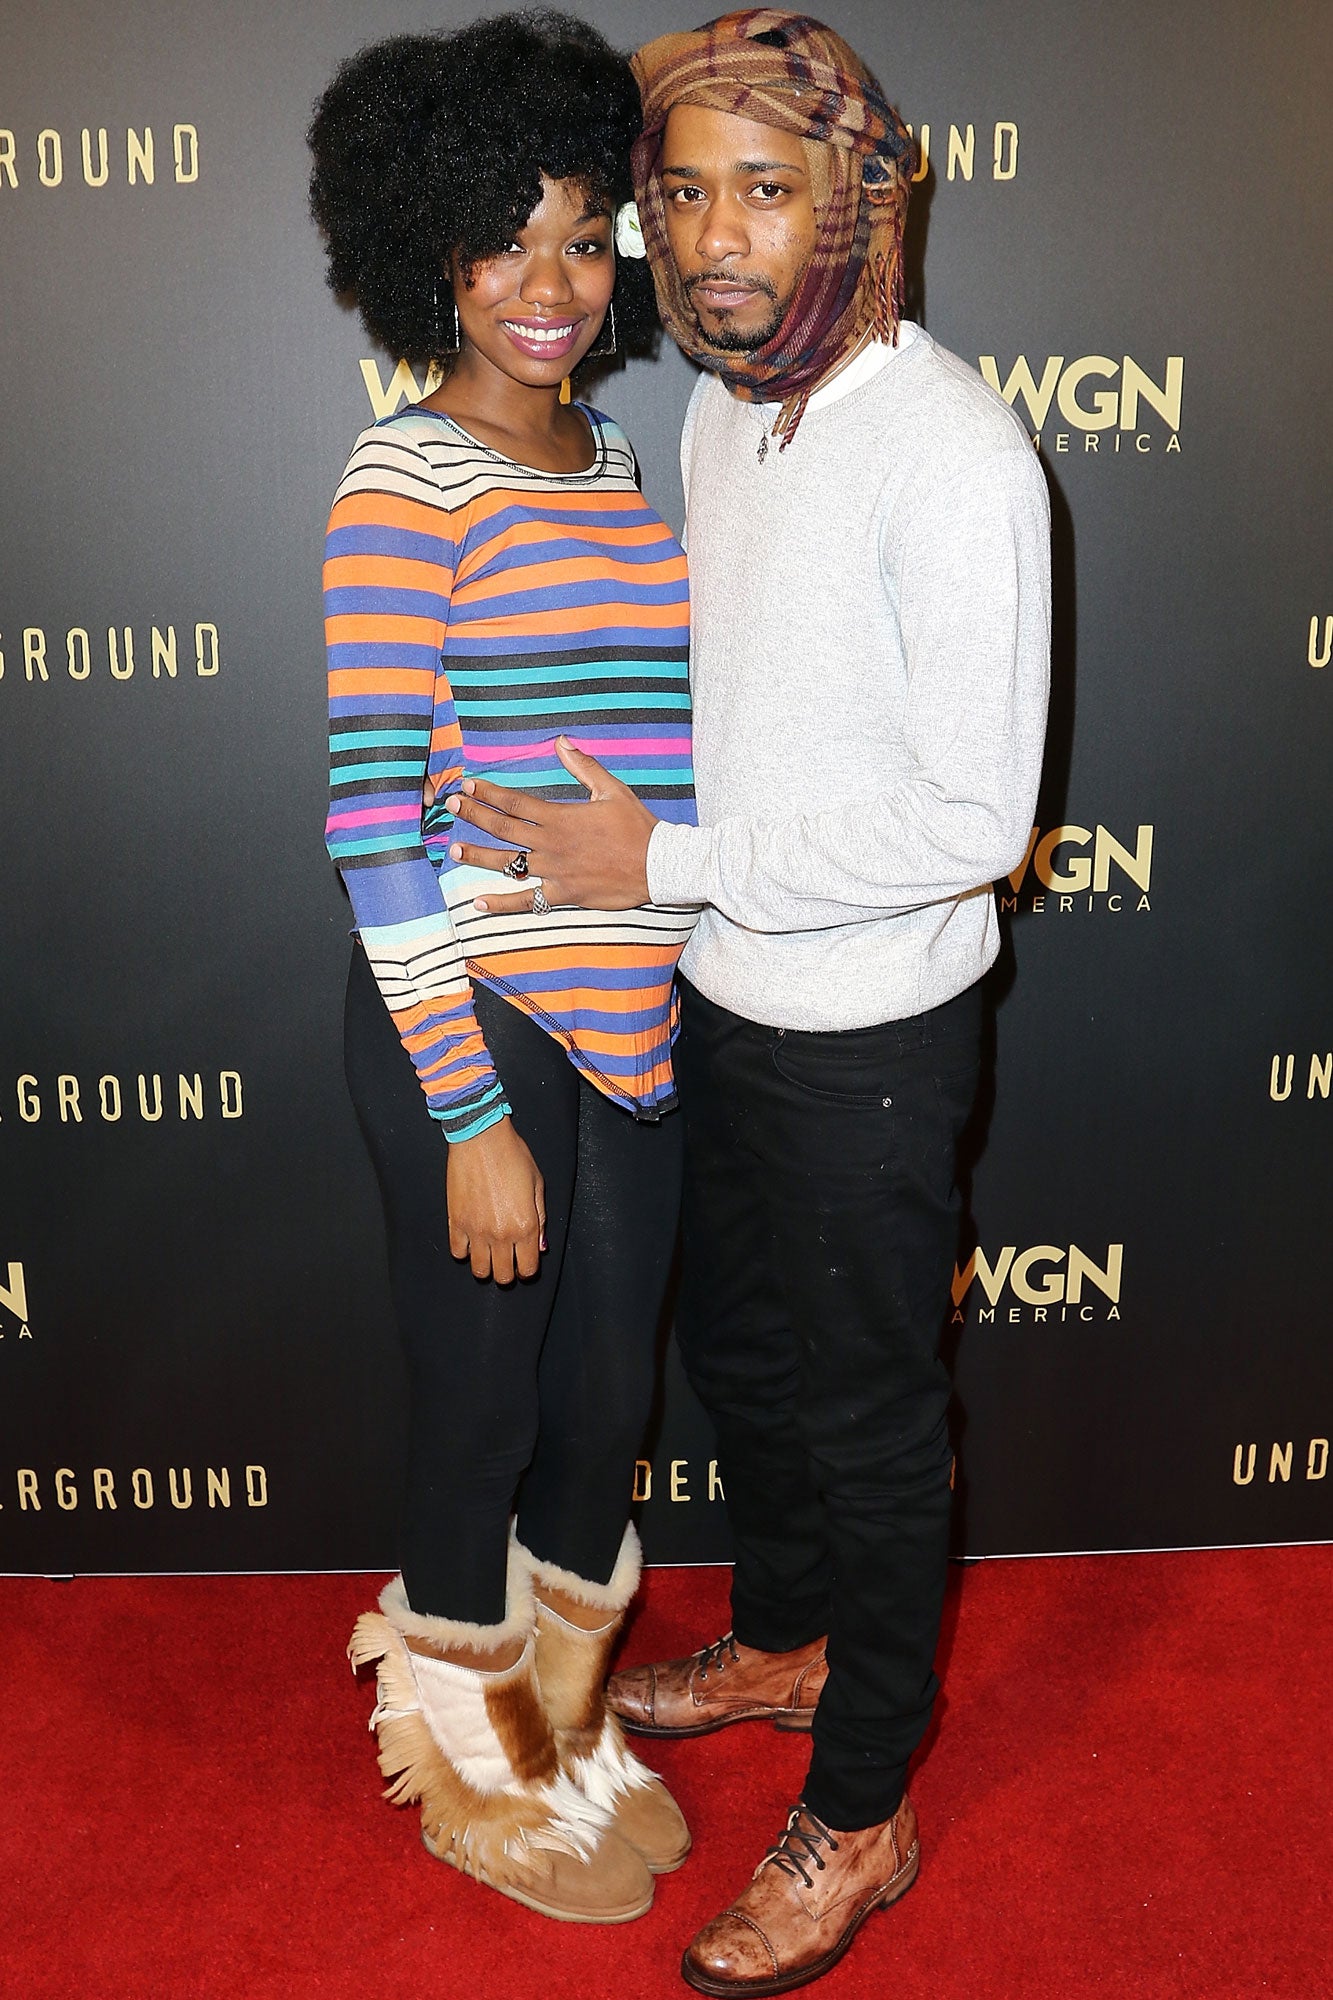 Lakeith Stanfield and Xosha Roquemore Expecting First Child
